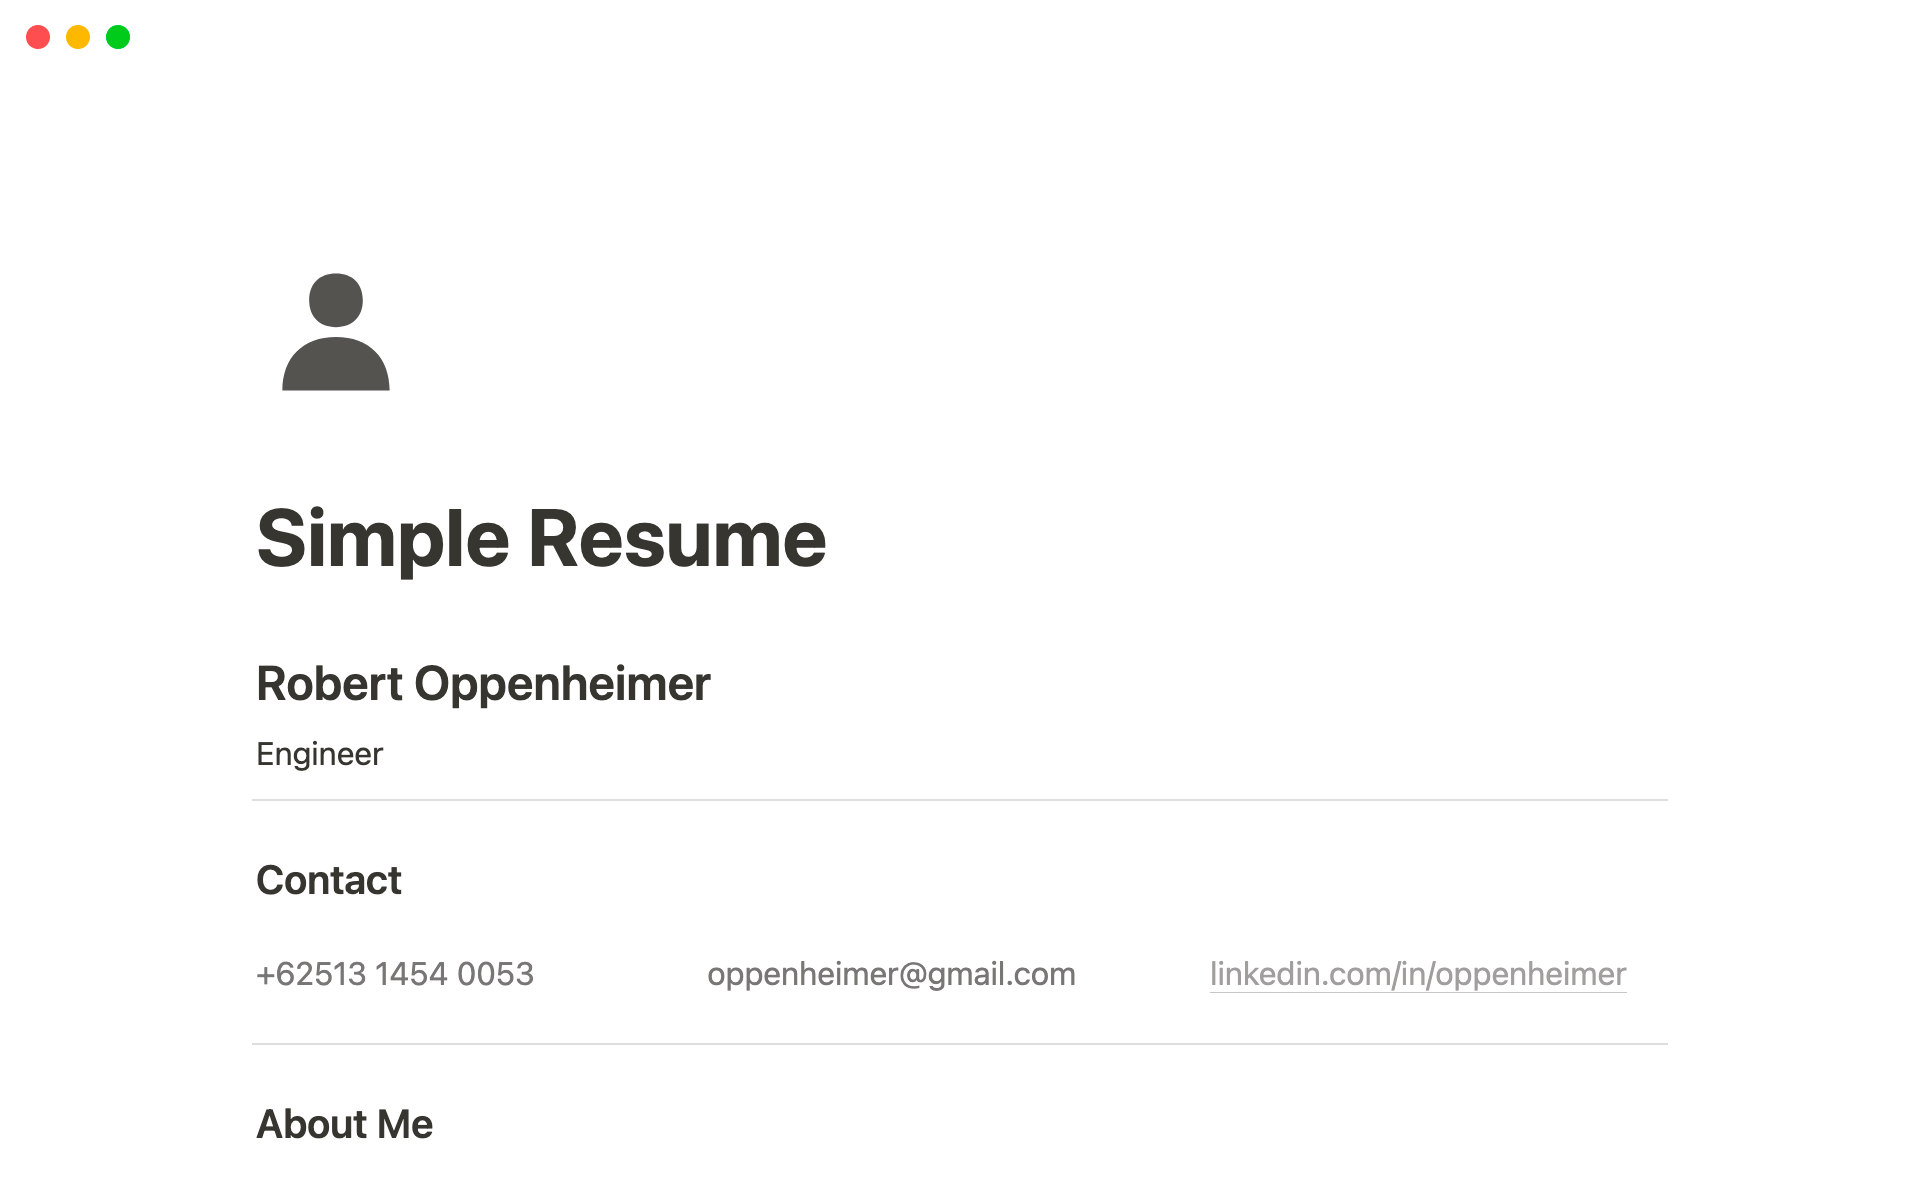 Crafting a standout resume just got easier with this Simple Resume Notion template